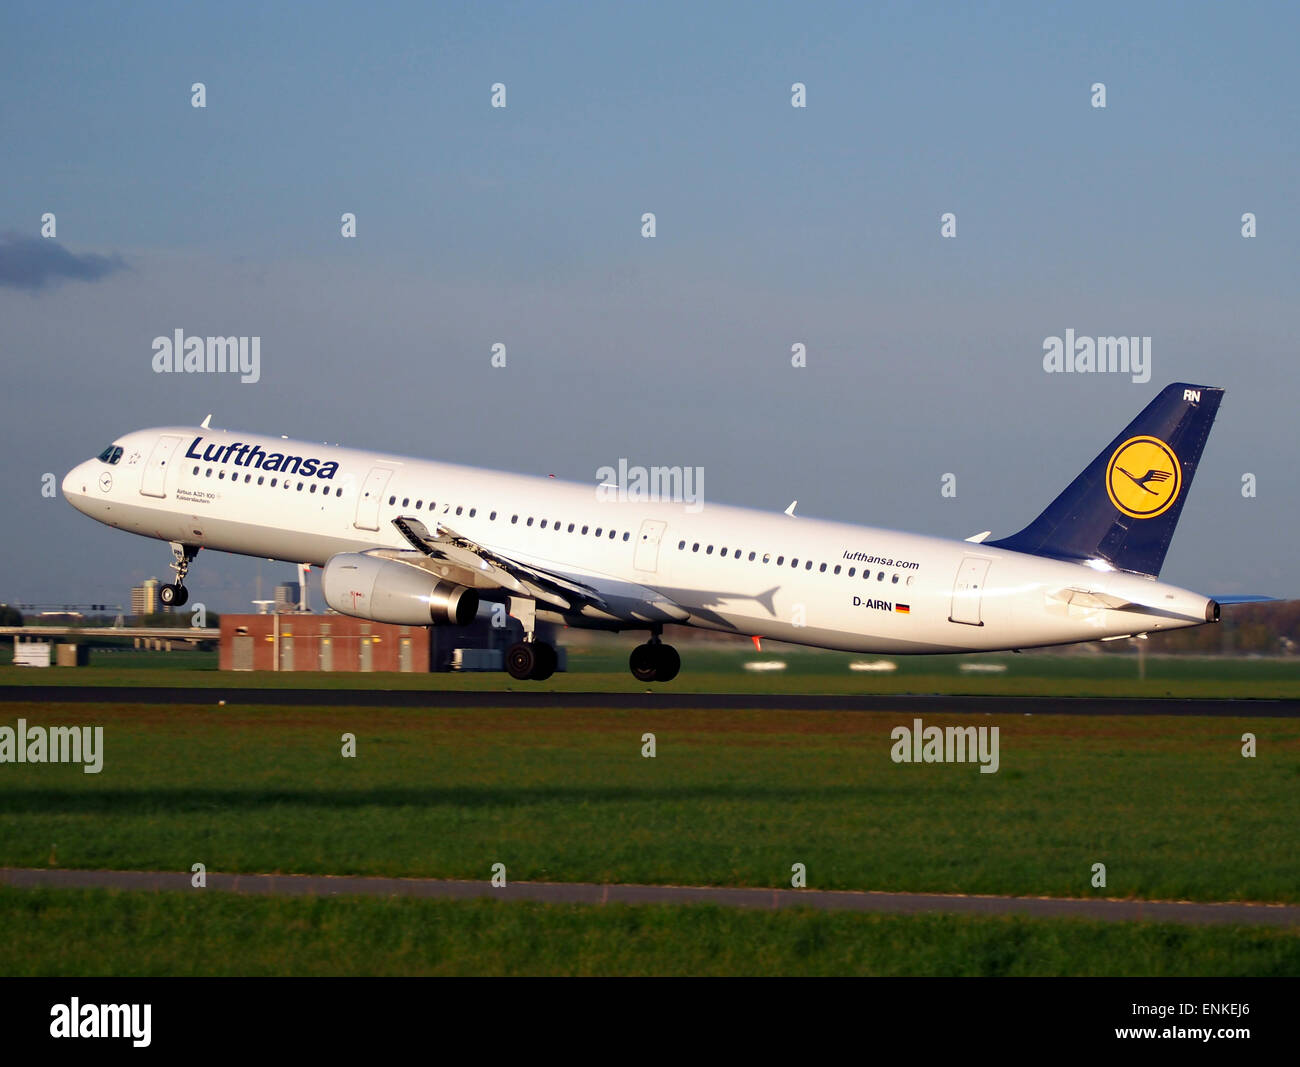 D-AIRN Lufthansa Airbus A321-131 takeoff from Polderbaan, Schiphol (AMS - EHAM) at sunset, Stock Photo